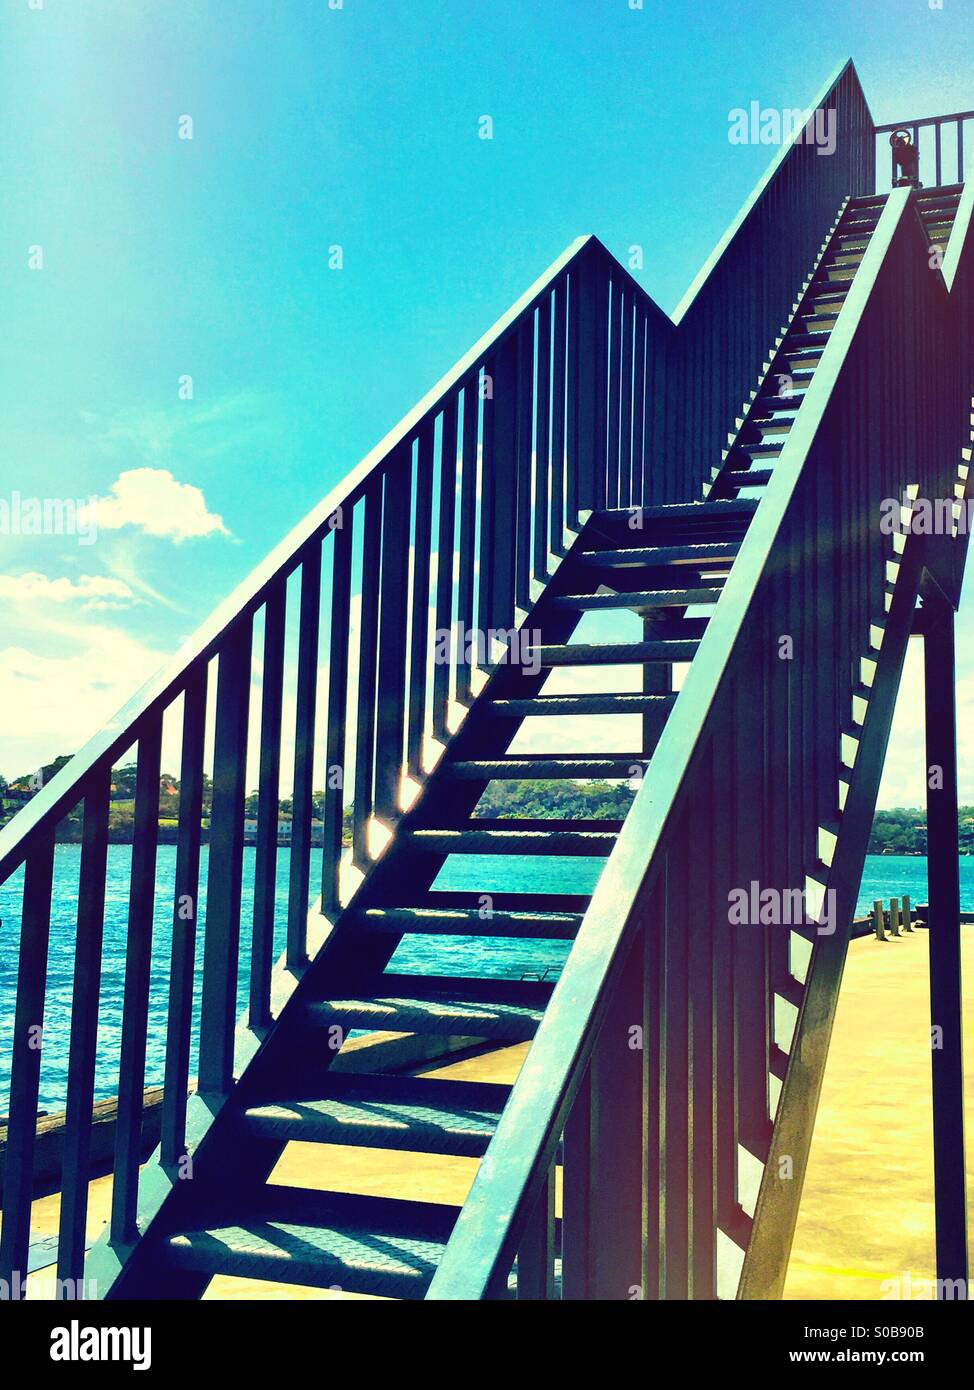 A stairway to heaven? Stock Photo